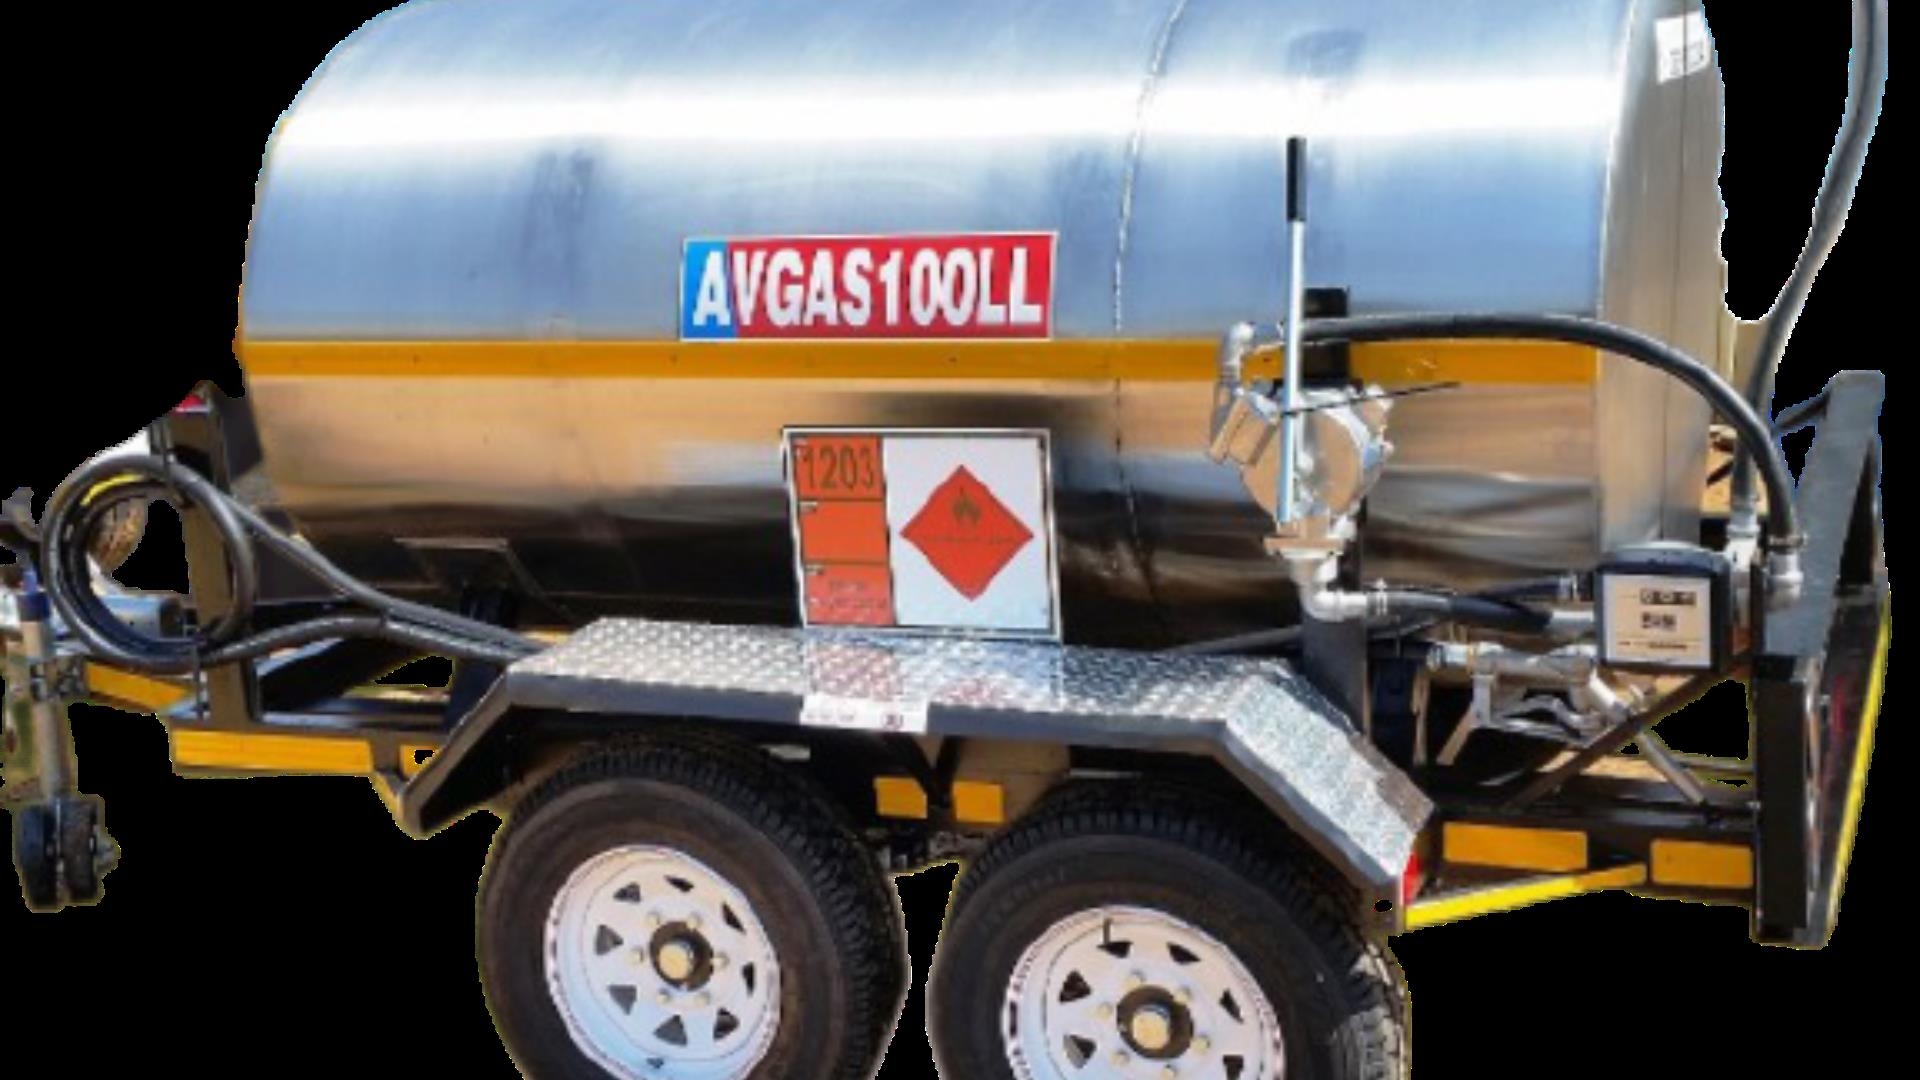 Custom Diesel bowser trailer 1500 Litre Stainless Steel Bowser FOR PETROL/AVGAS 2022 for sale by Jikelele Tankers and Trailers   | Truck & Trailer Marketplaces